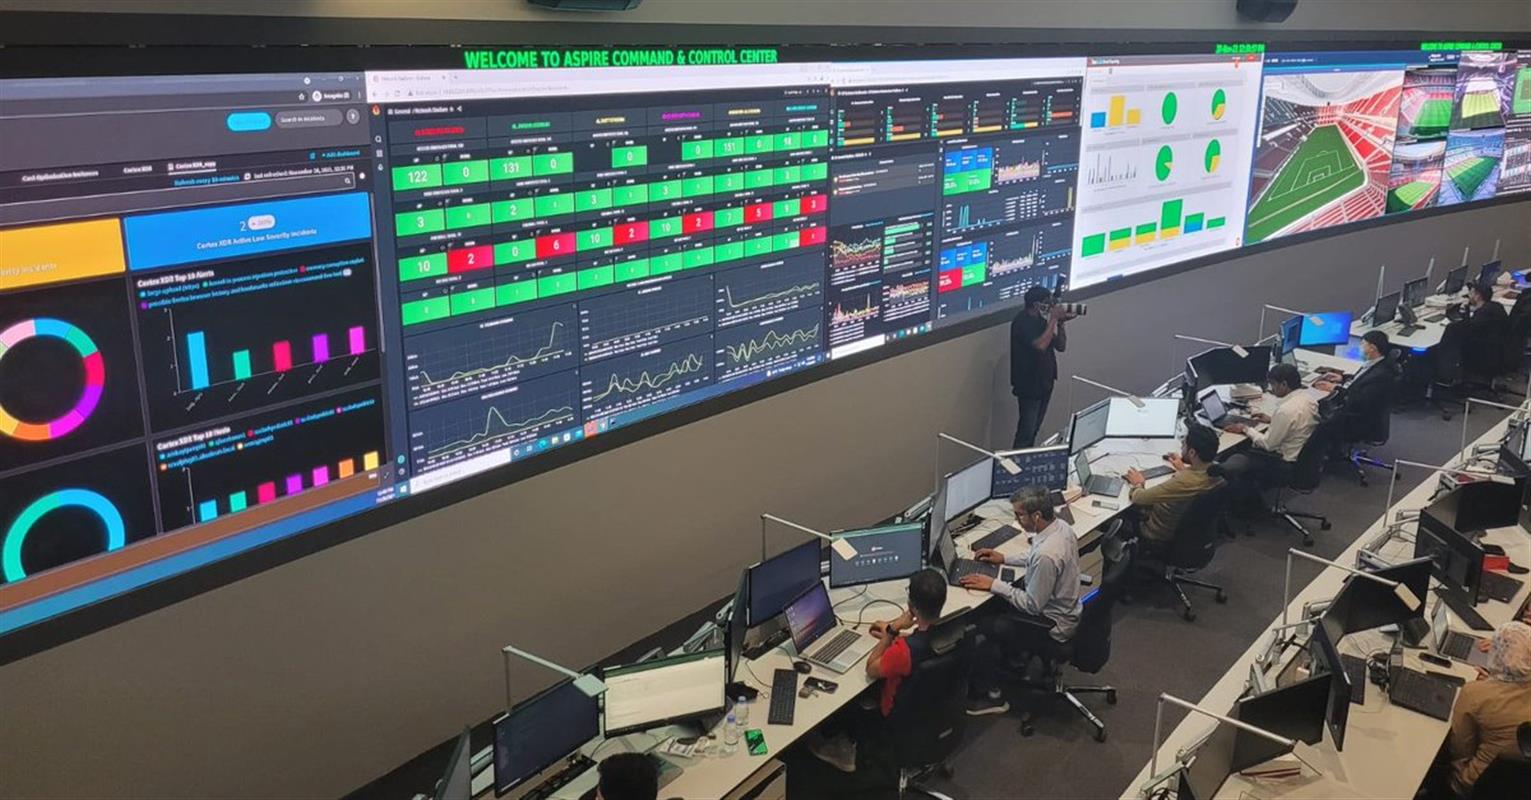 Aspire Command and Control Center for FIFA World Cup Qatar 2022 Stadiums  starts operations - Read Qatar Tribune on the go for unrivalled news  coverage